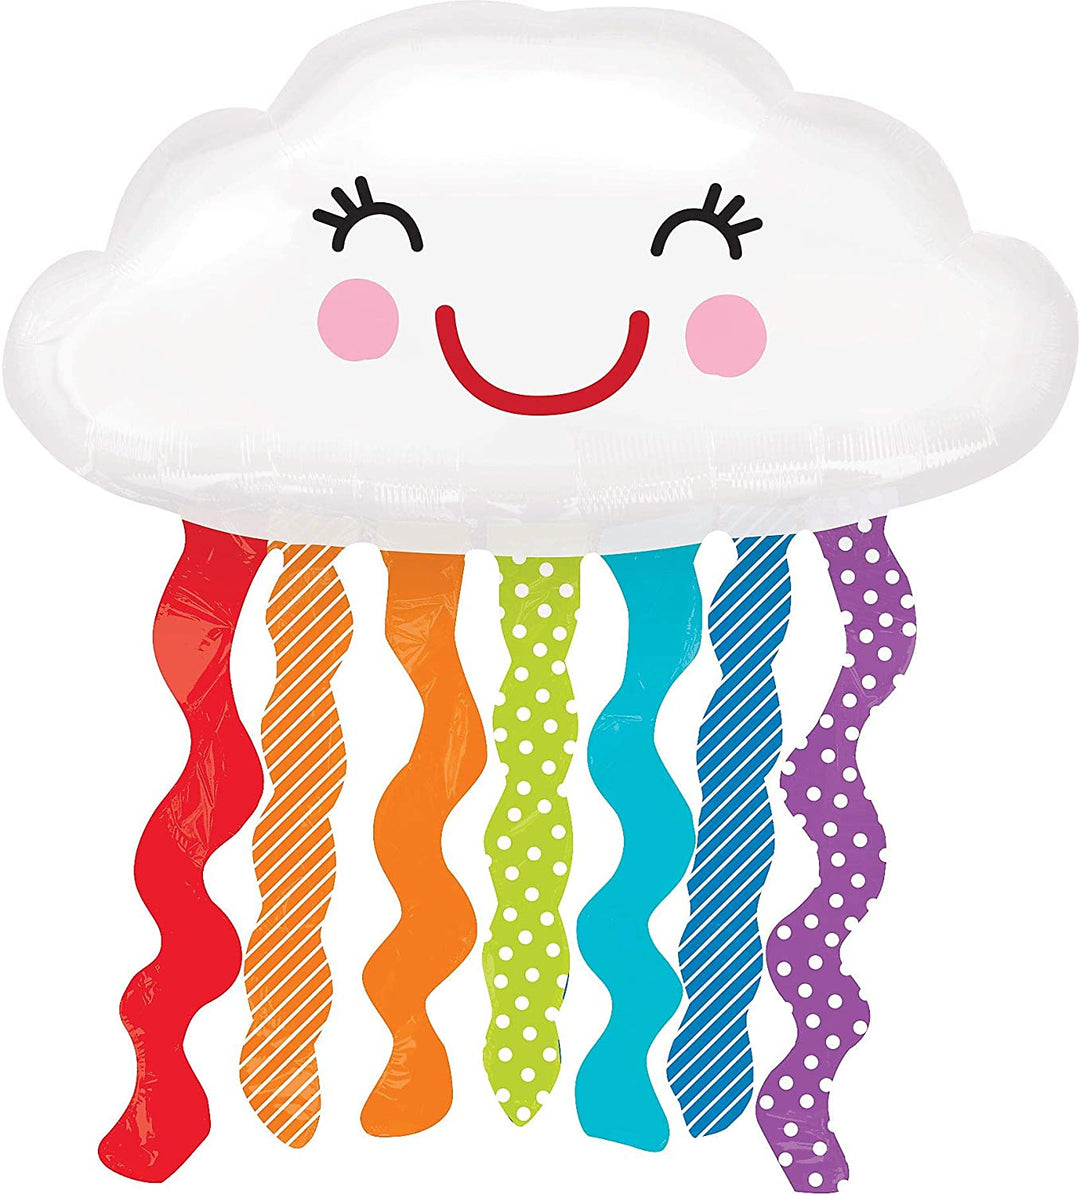 RAINBOW AND CLOUDS BALLOON Anagram Balloon Bonjour Fete - Party Supplies